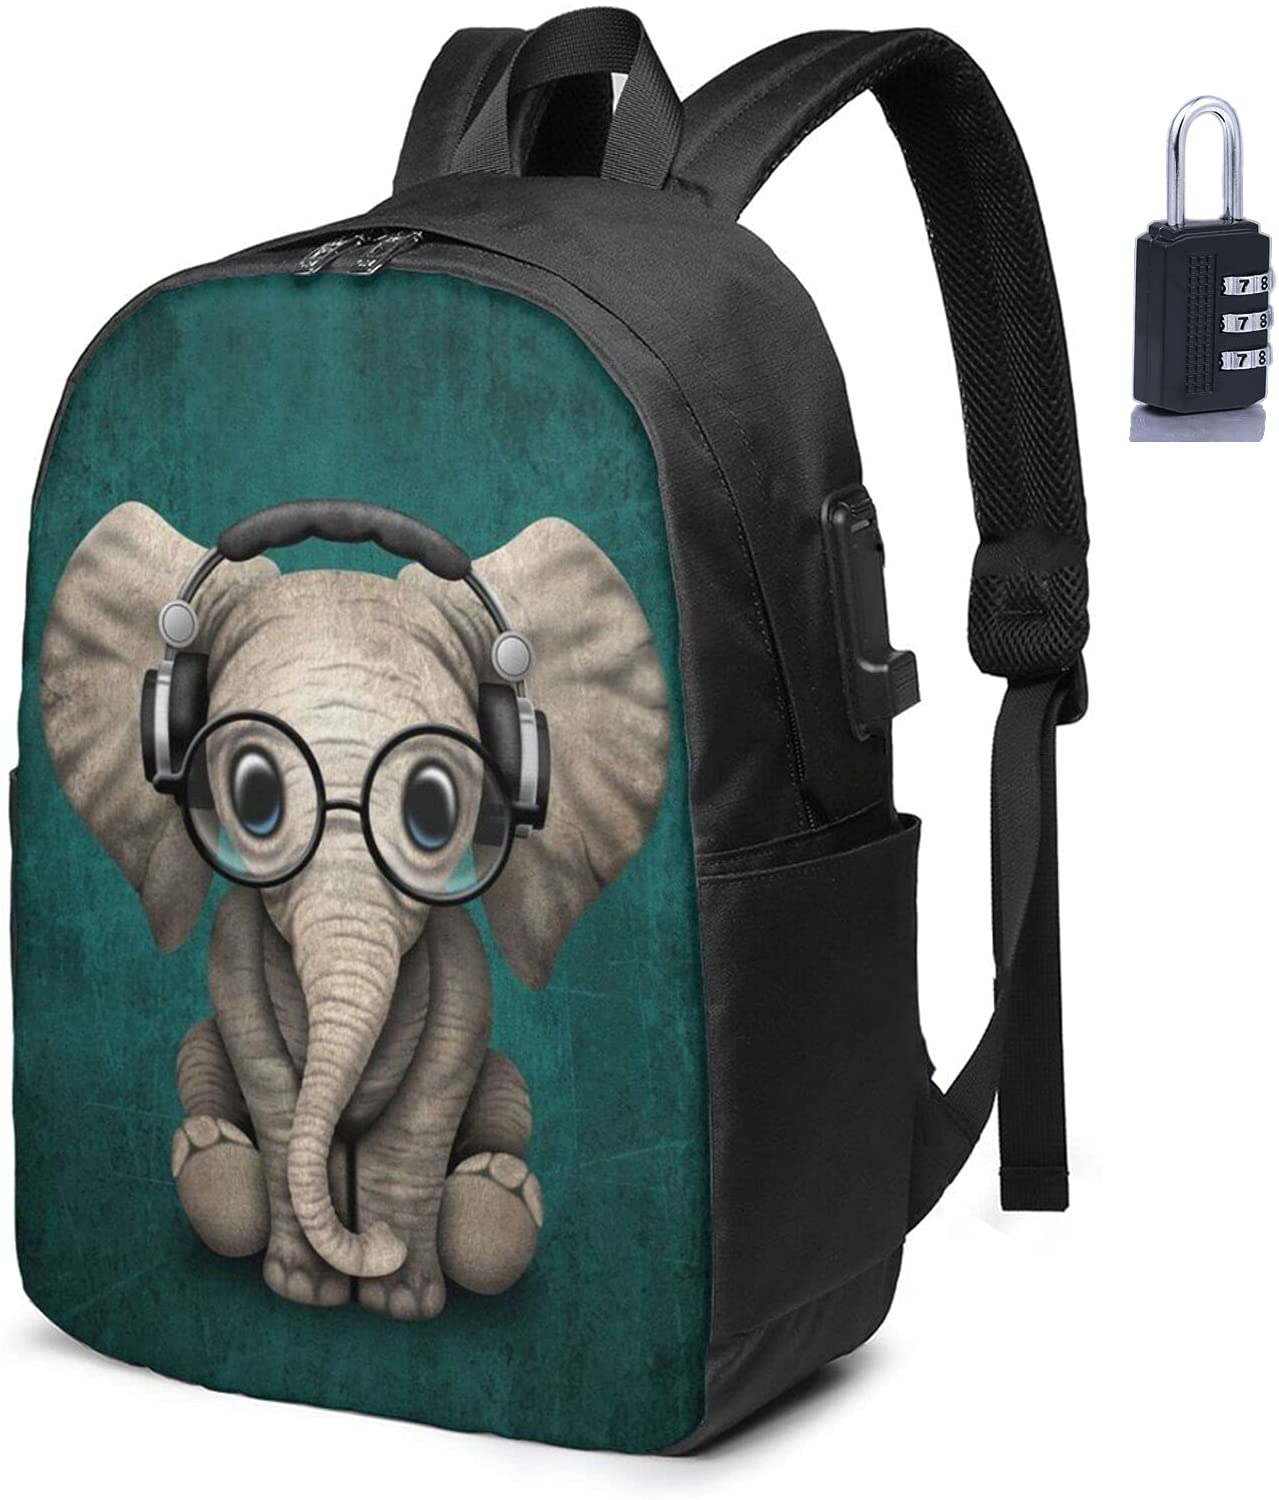 Cute Elephant Travel Backpack With USB Charging Port Fit 17 Inch Laptops